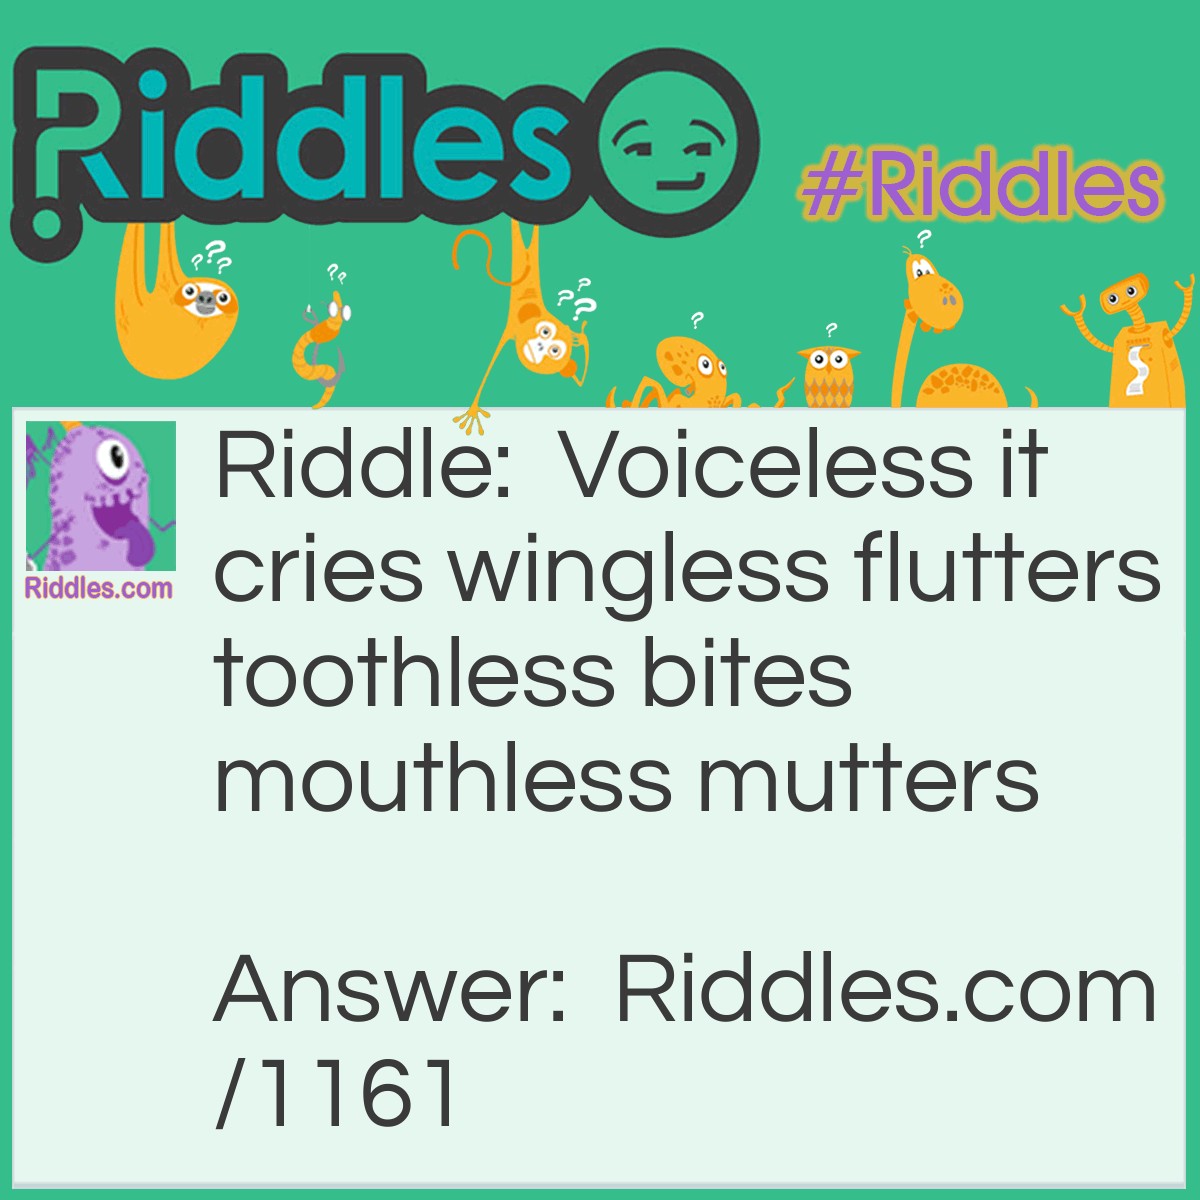 Riddle: Voiceless it cries, Wingless flutters, Toothless bites, Mouthless mutters. What is it? Answer: The wind.